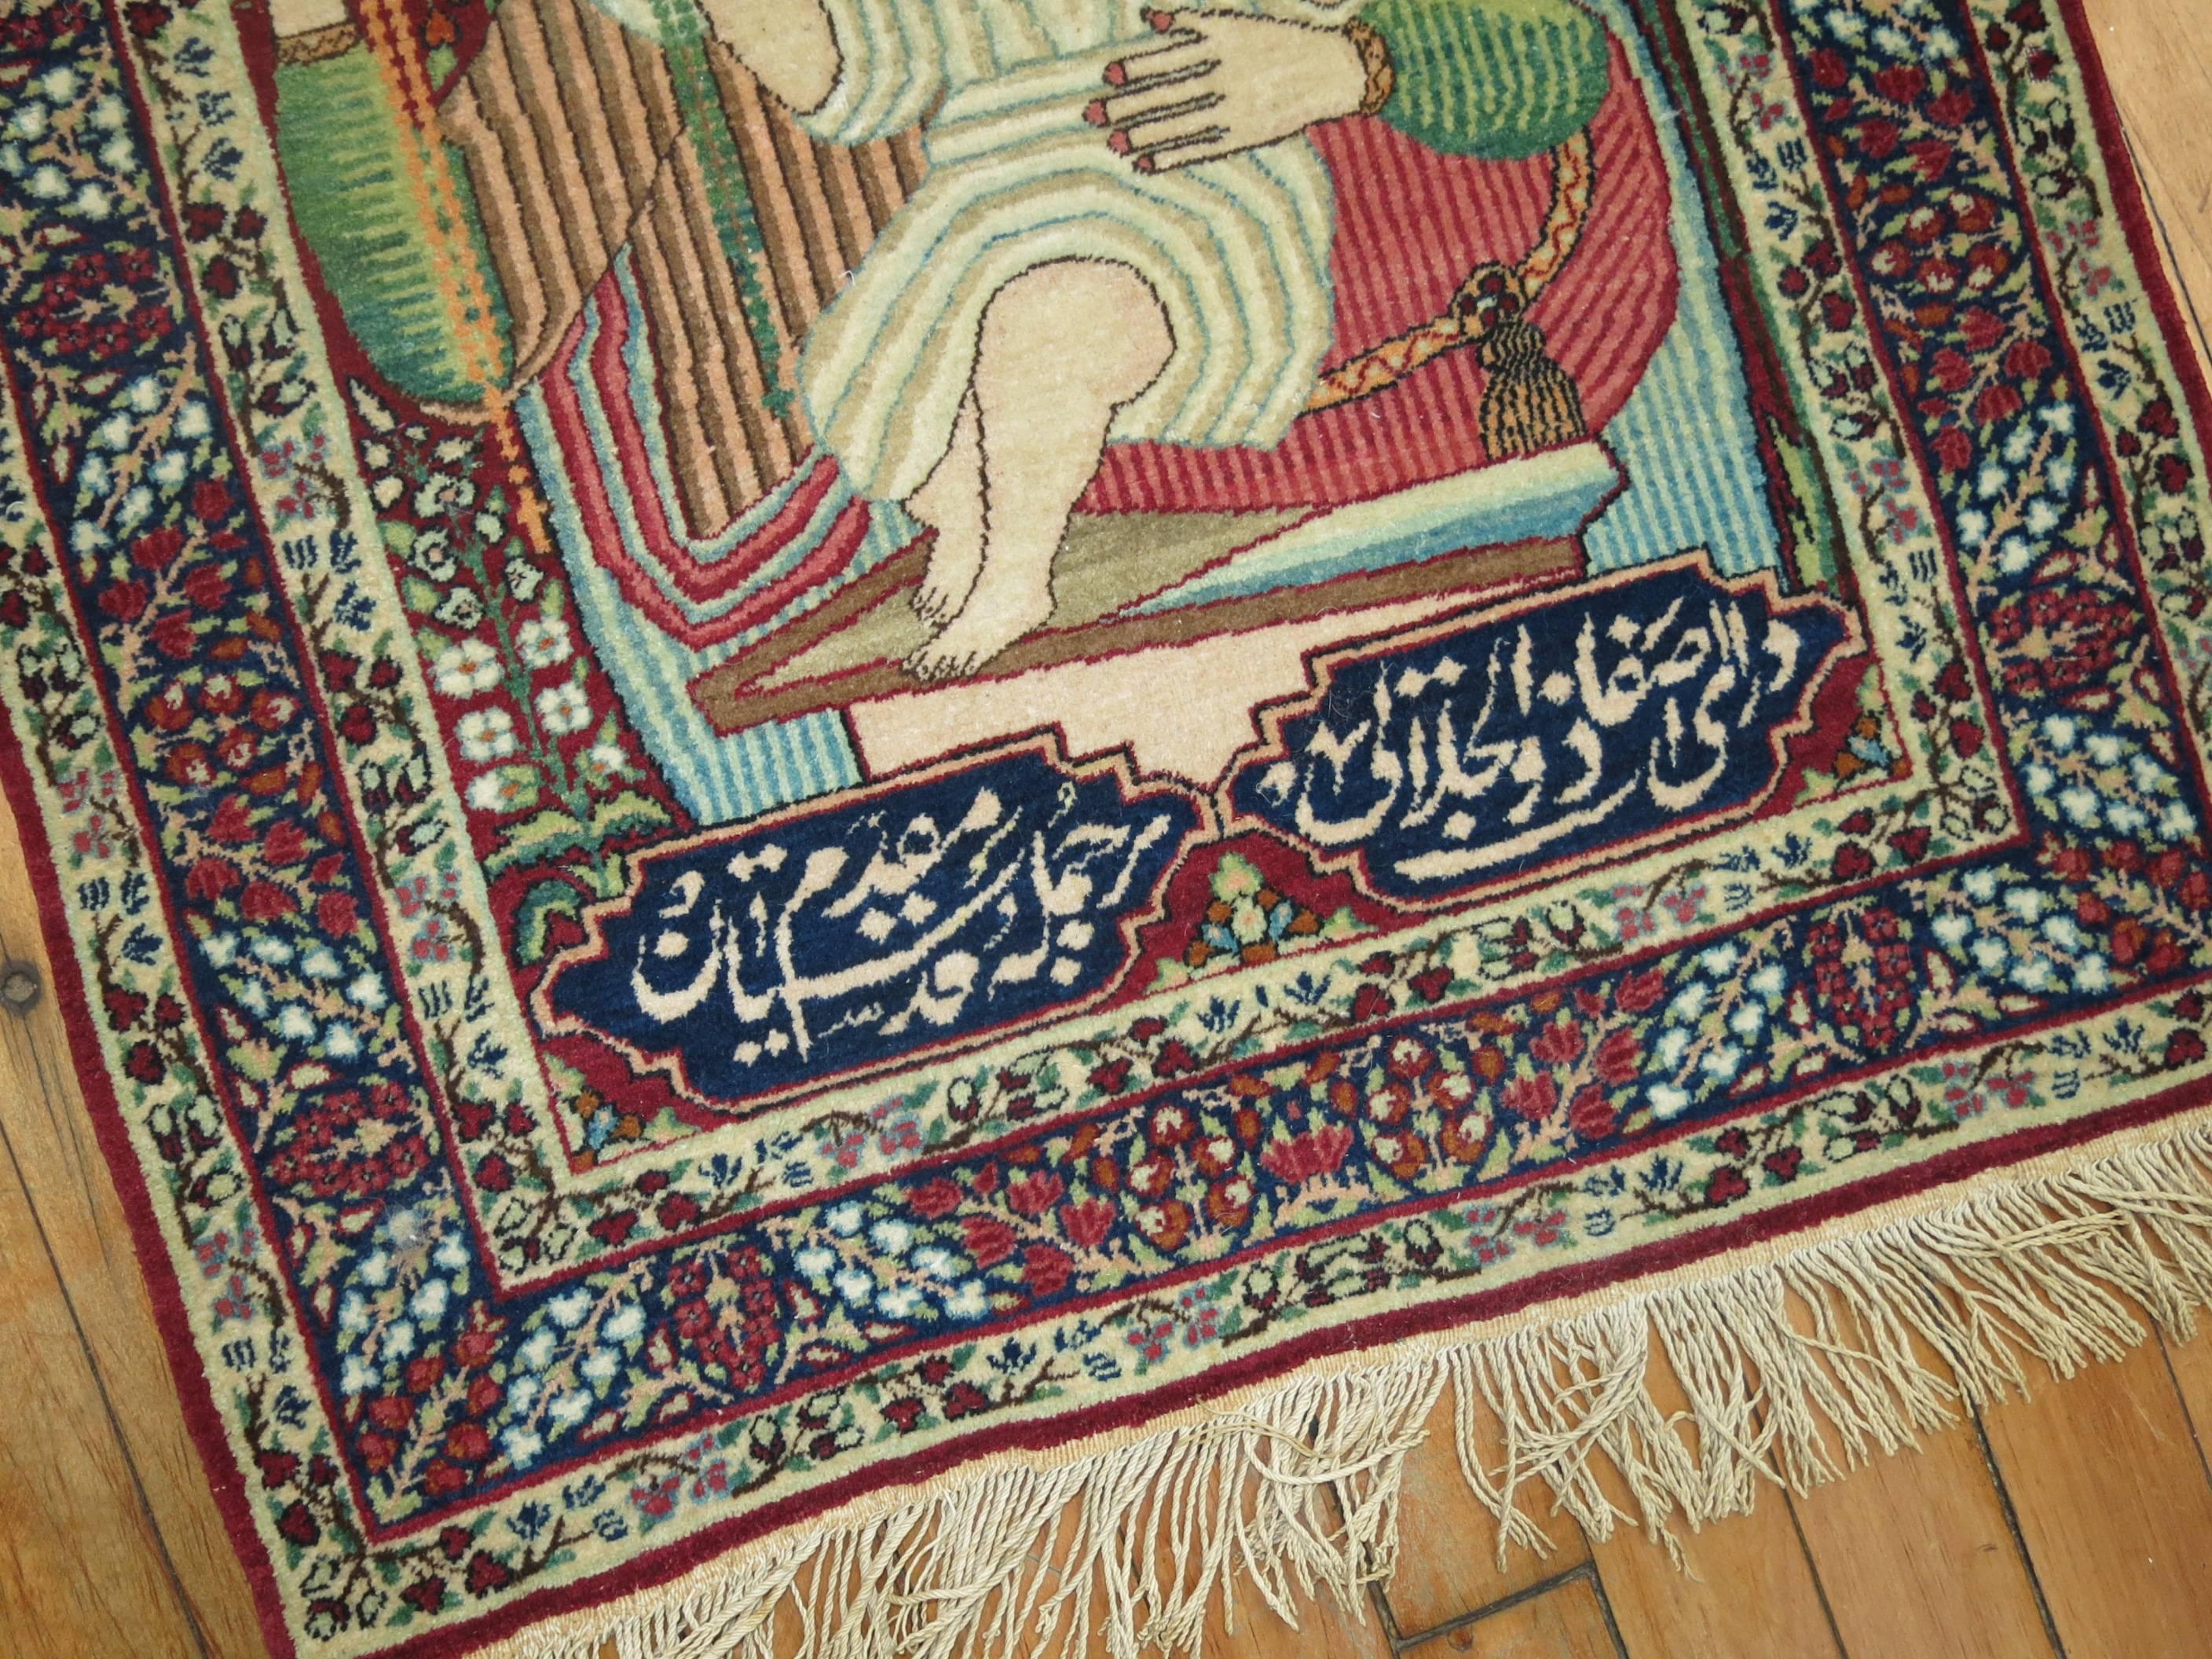 An early 20th century fine quality Lavar Kerman pictorial rug with Mother Mary holding Jesus Christ as an infant. The inscription is a love poem written in Arabic.